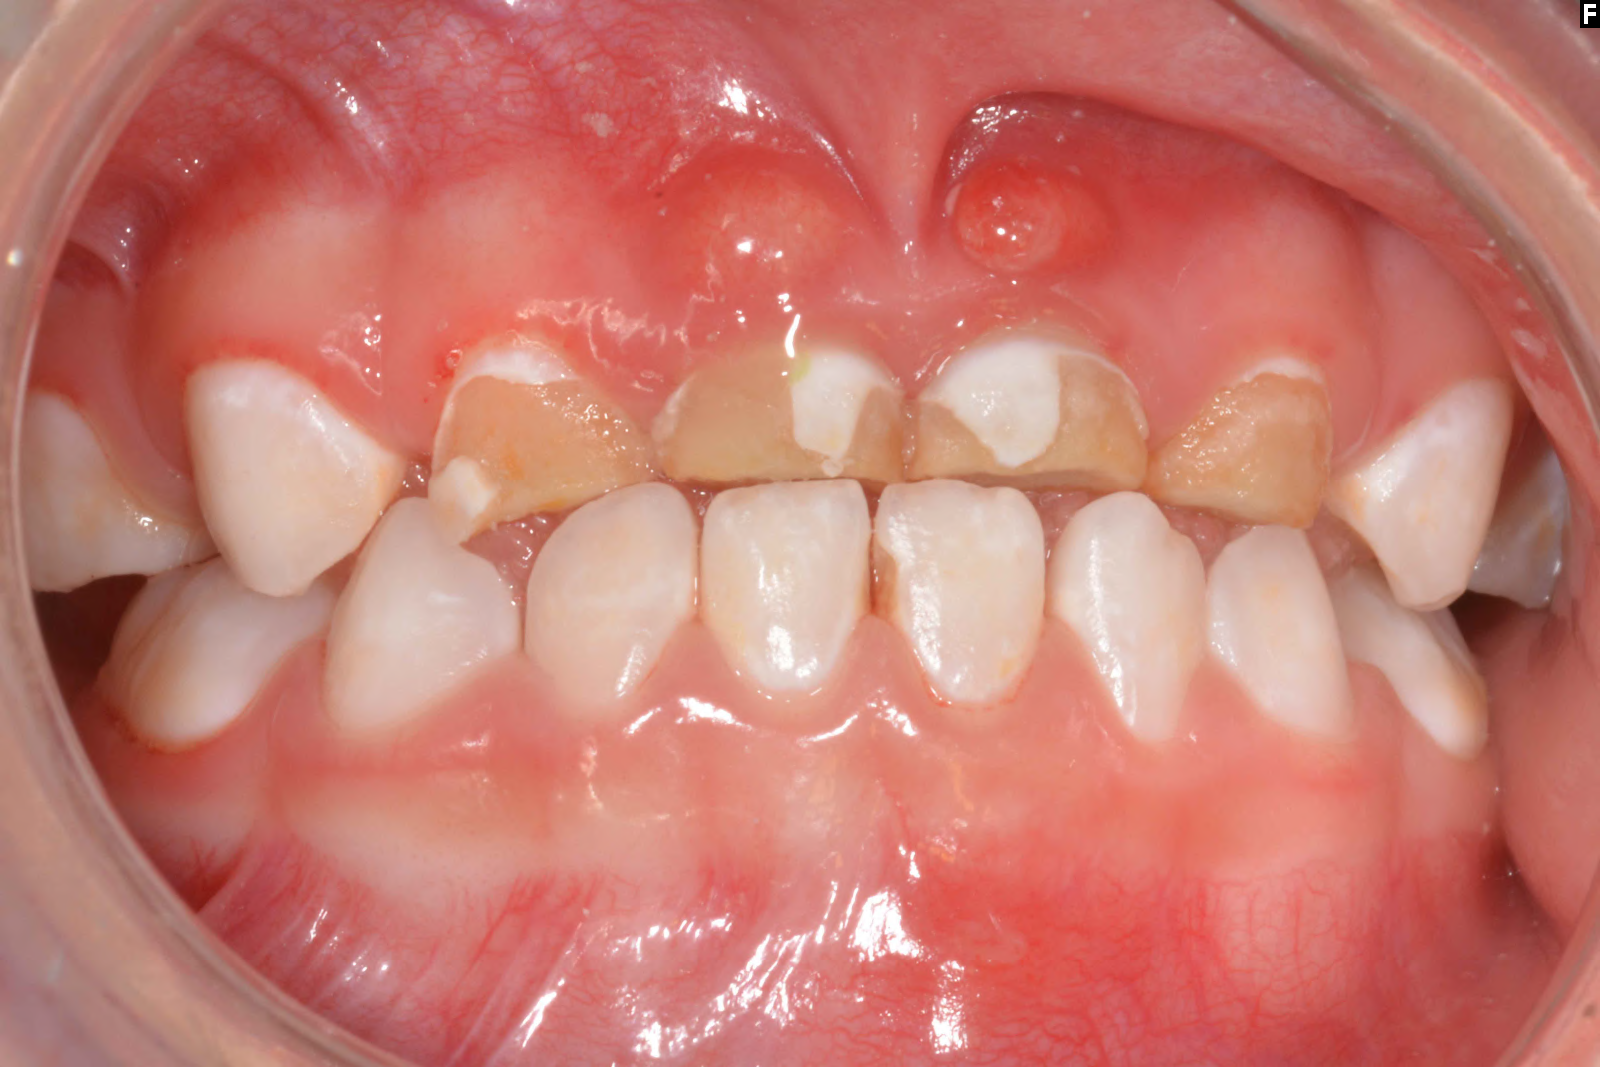 Early Childhood Caries Symptoms: White Spot Lesions, Tooth Decay, Pain ...